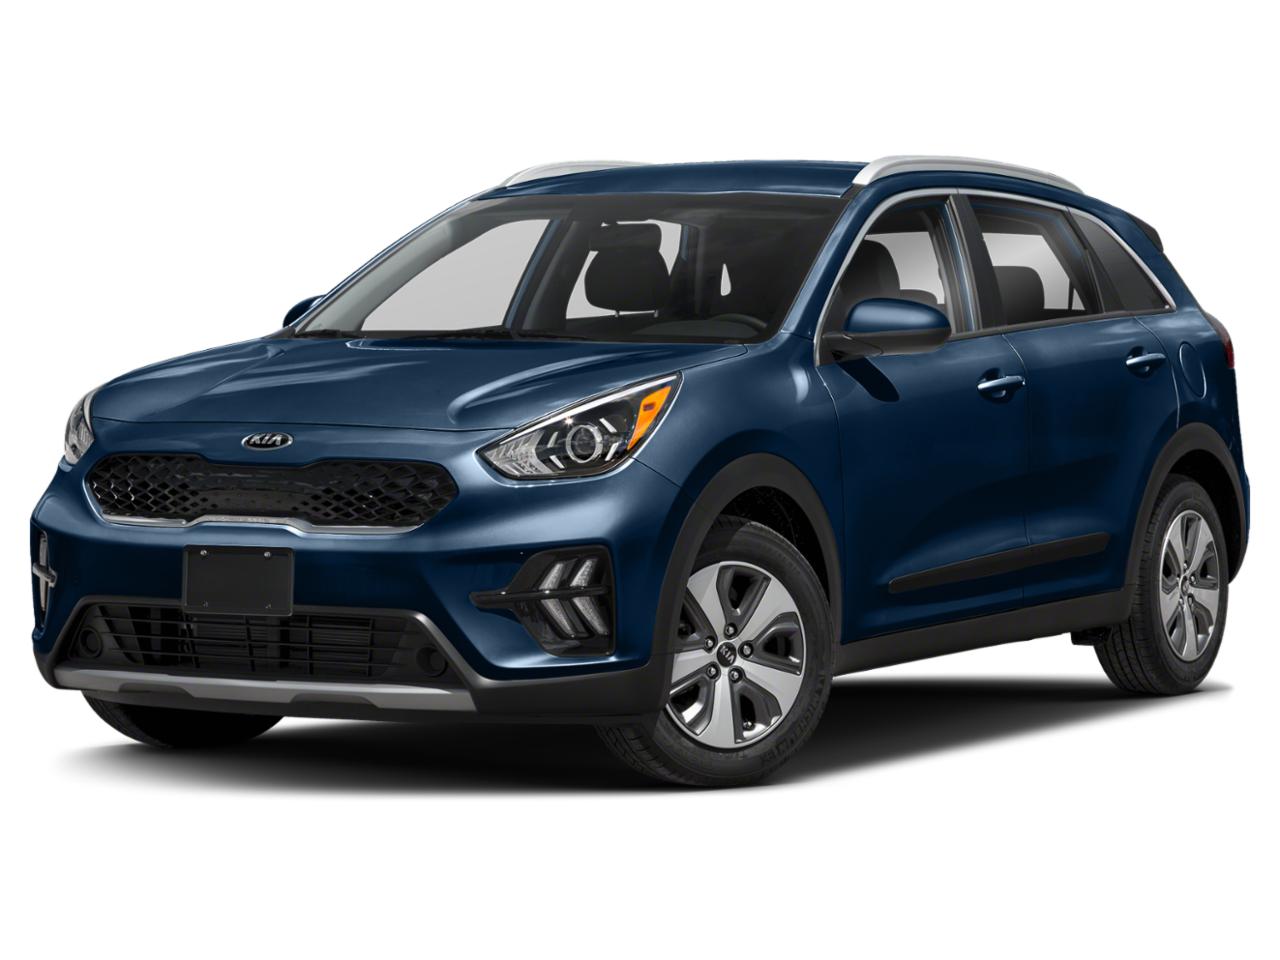 Used Blue 2021 Kia Niro Suv for Sale in INDEPENDENCE, MO - K5298A